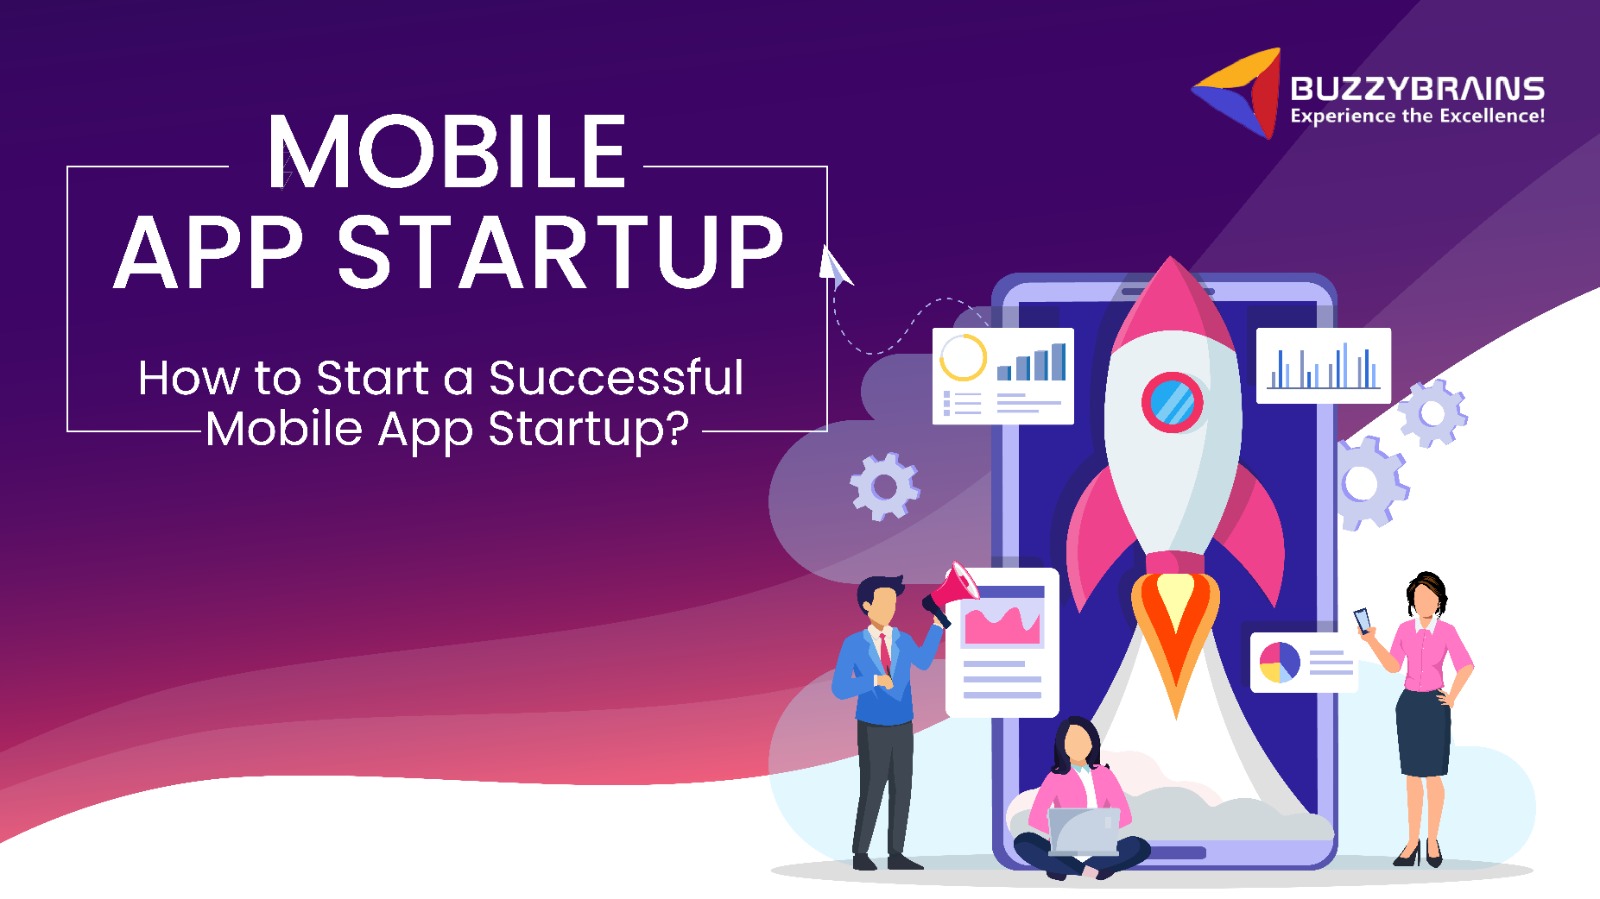 How to Start a Successful Mobile App Startup